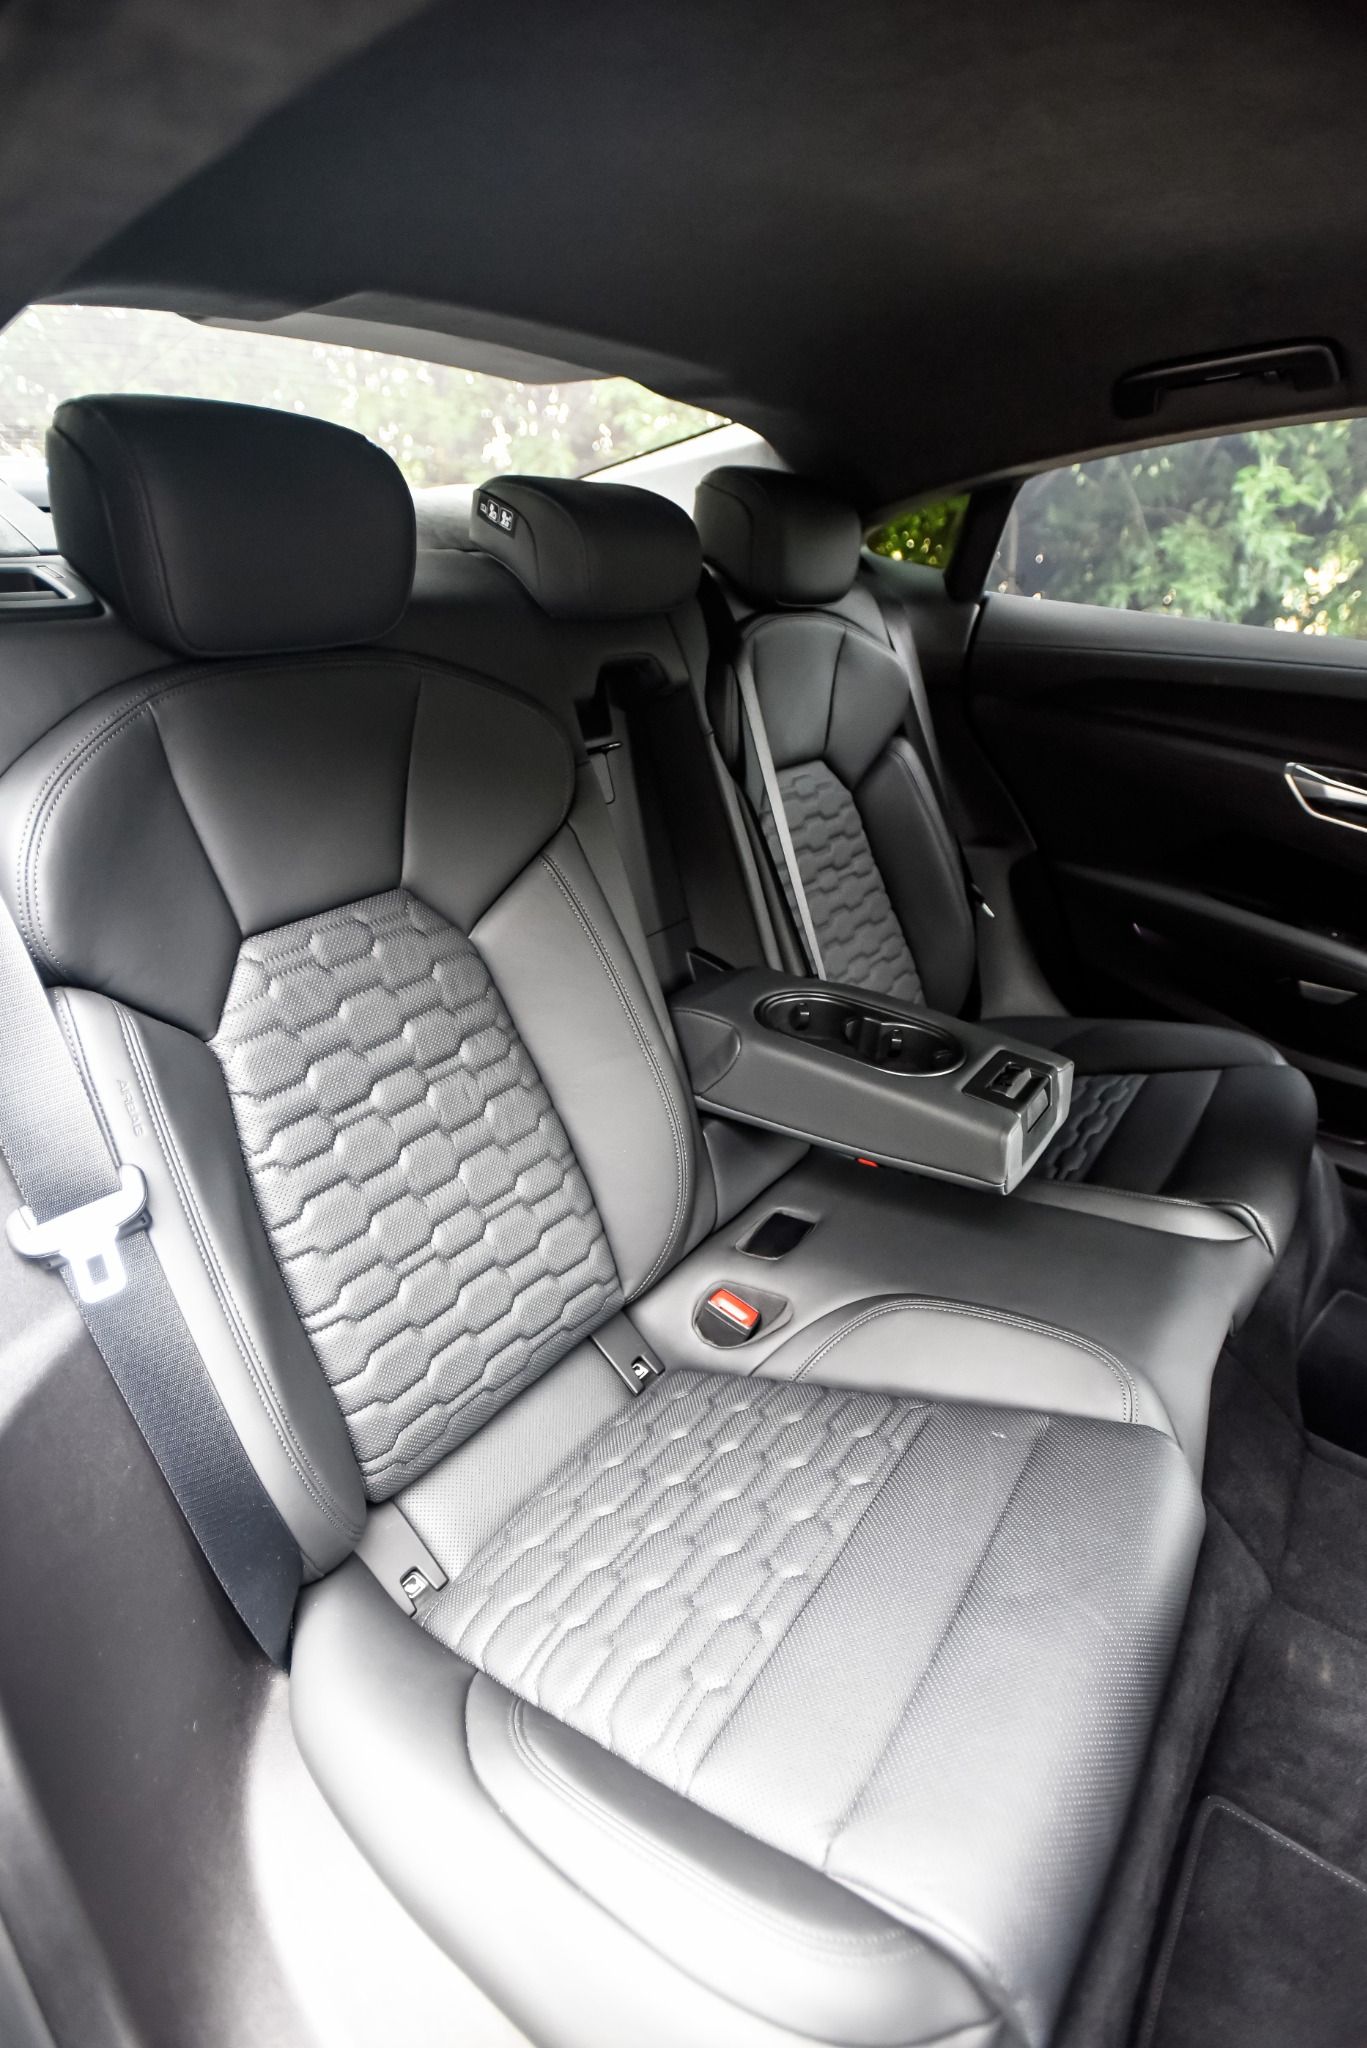 back seats of an Audi Rs e-Tron gt.